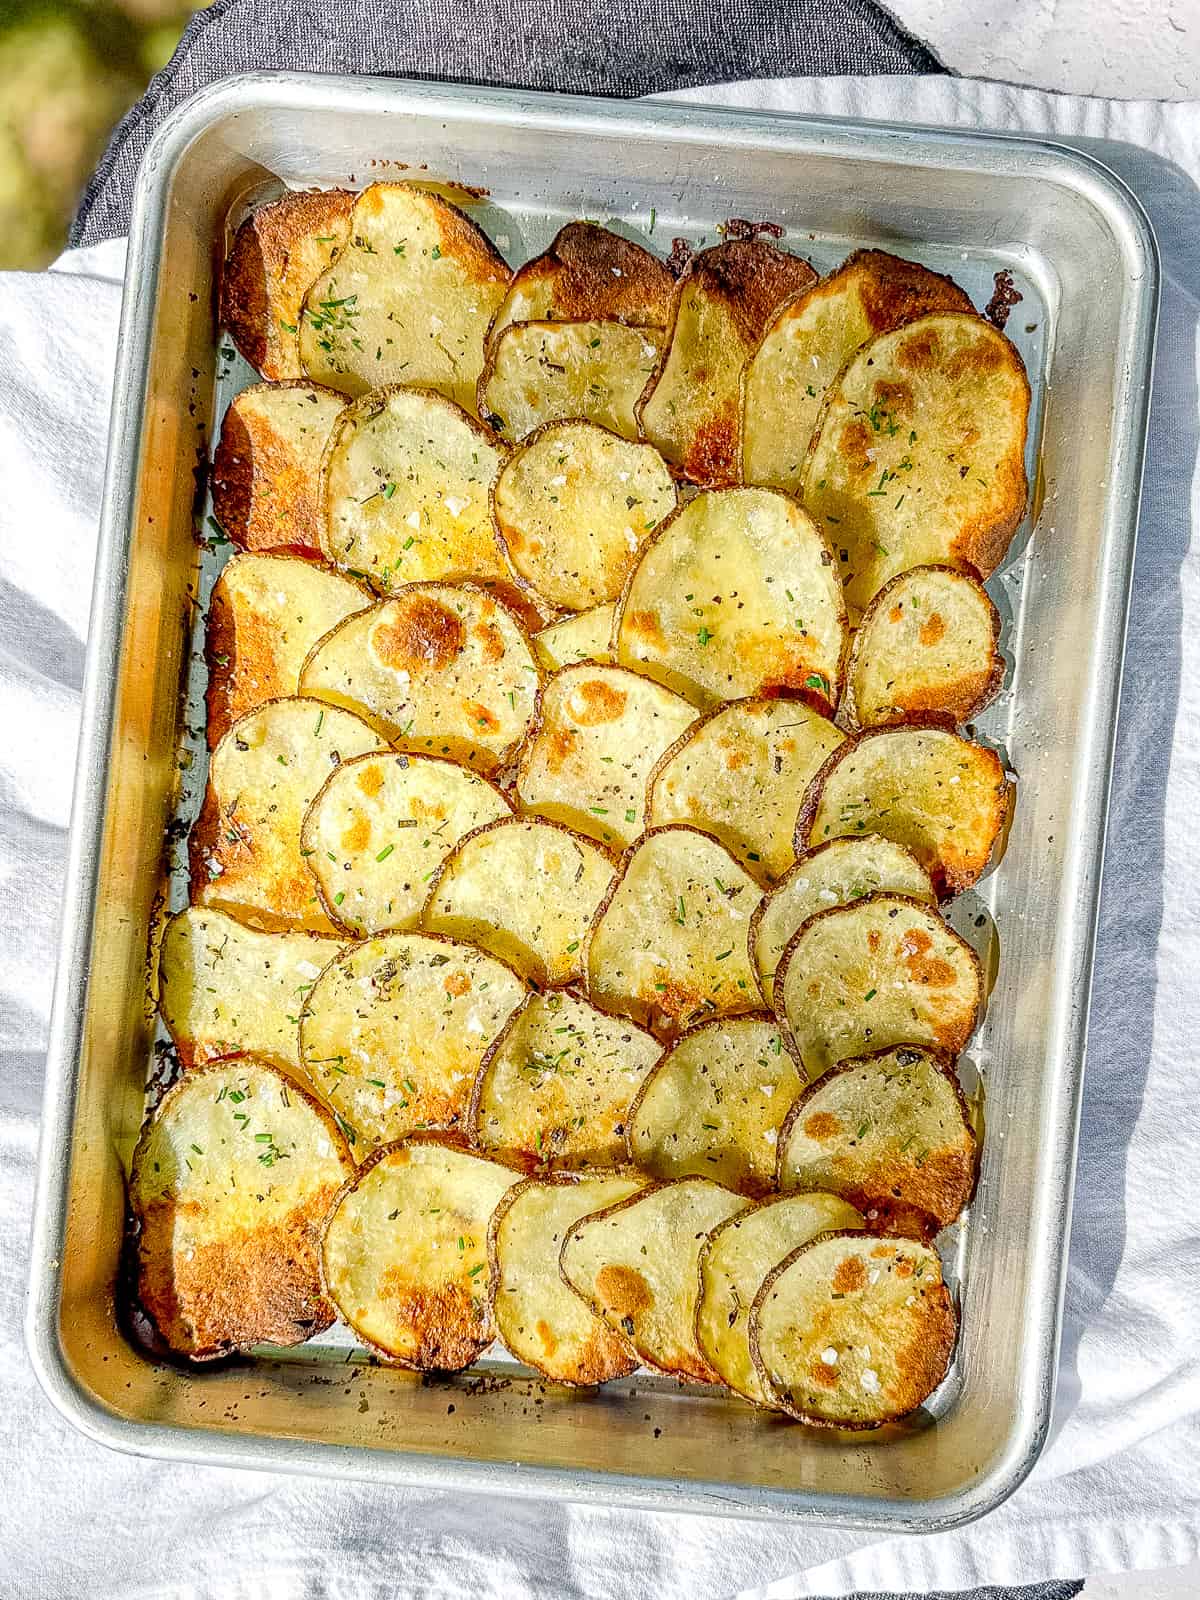 Sheet pan filled with crispy roasted potato slices.